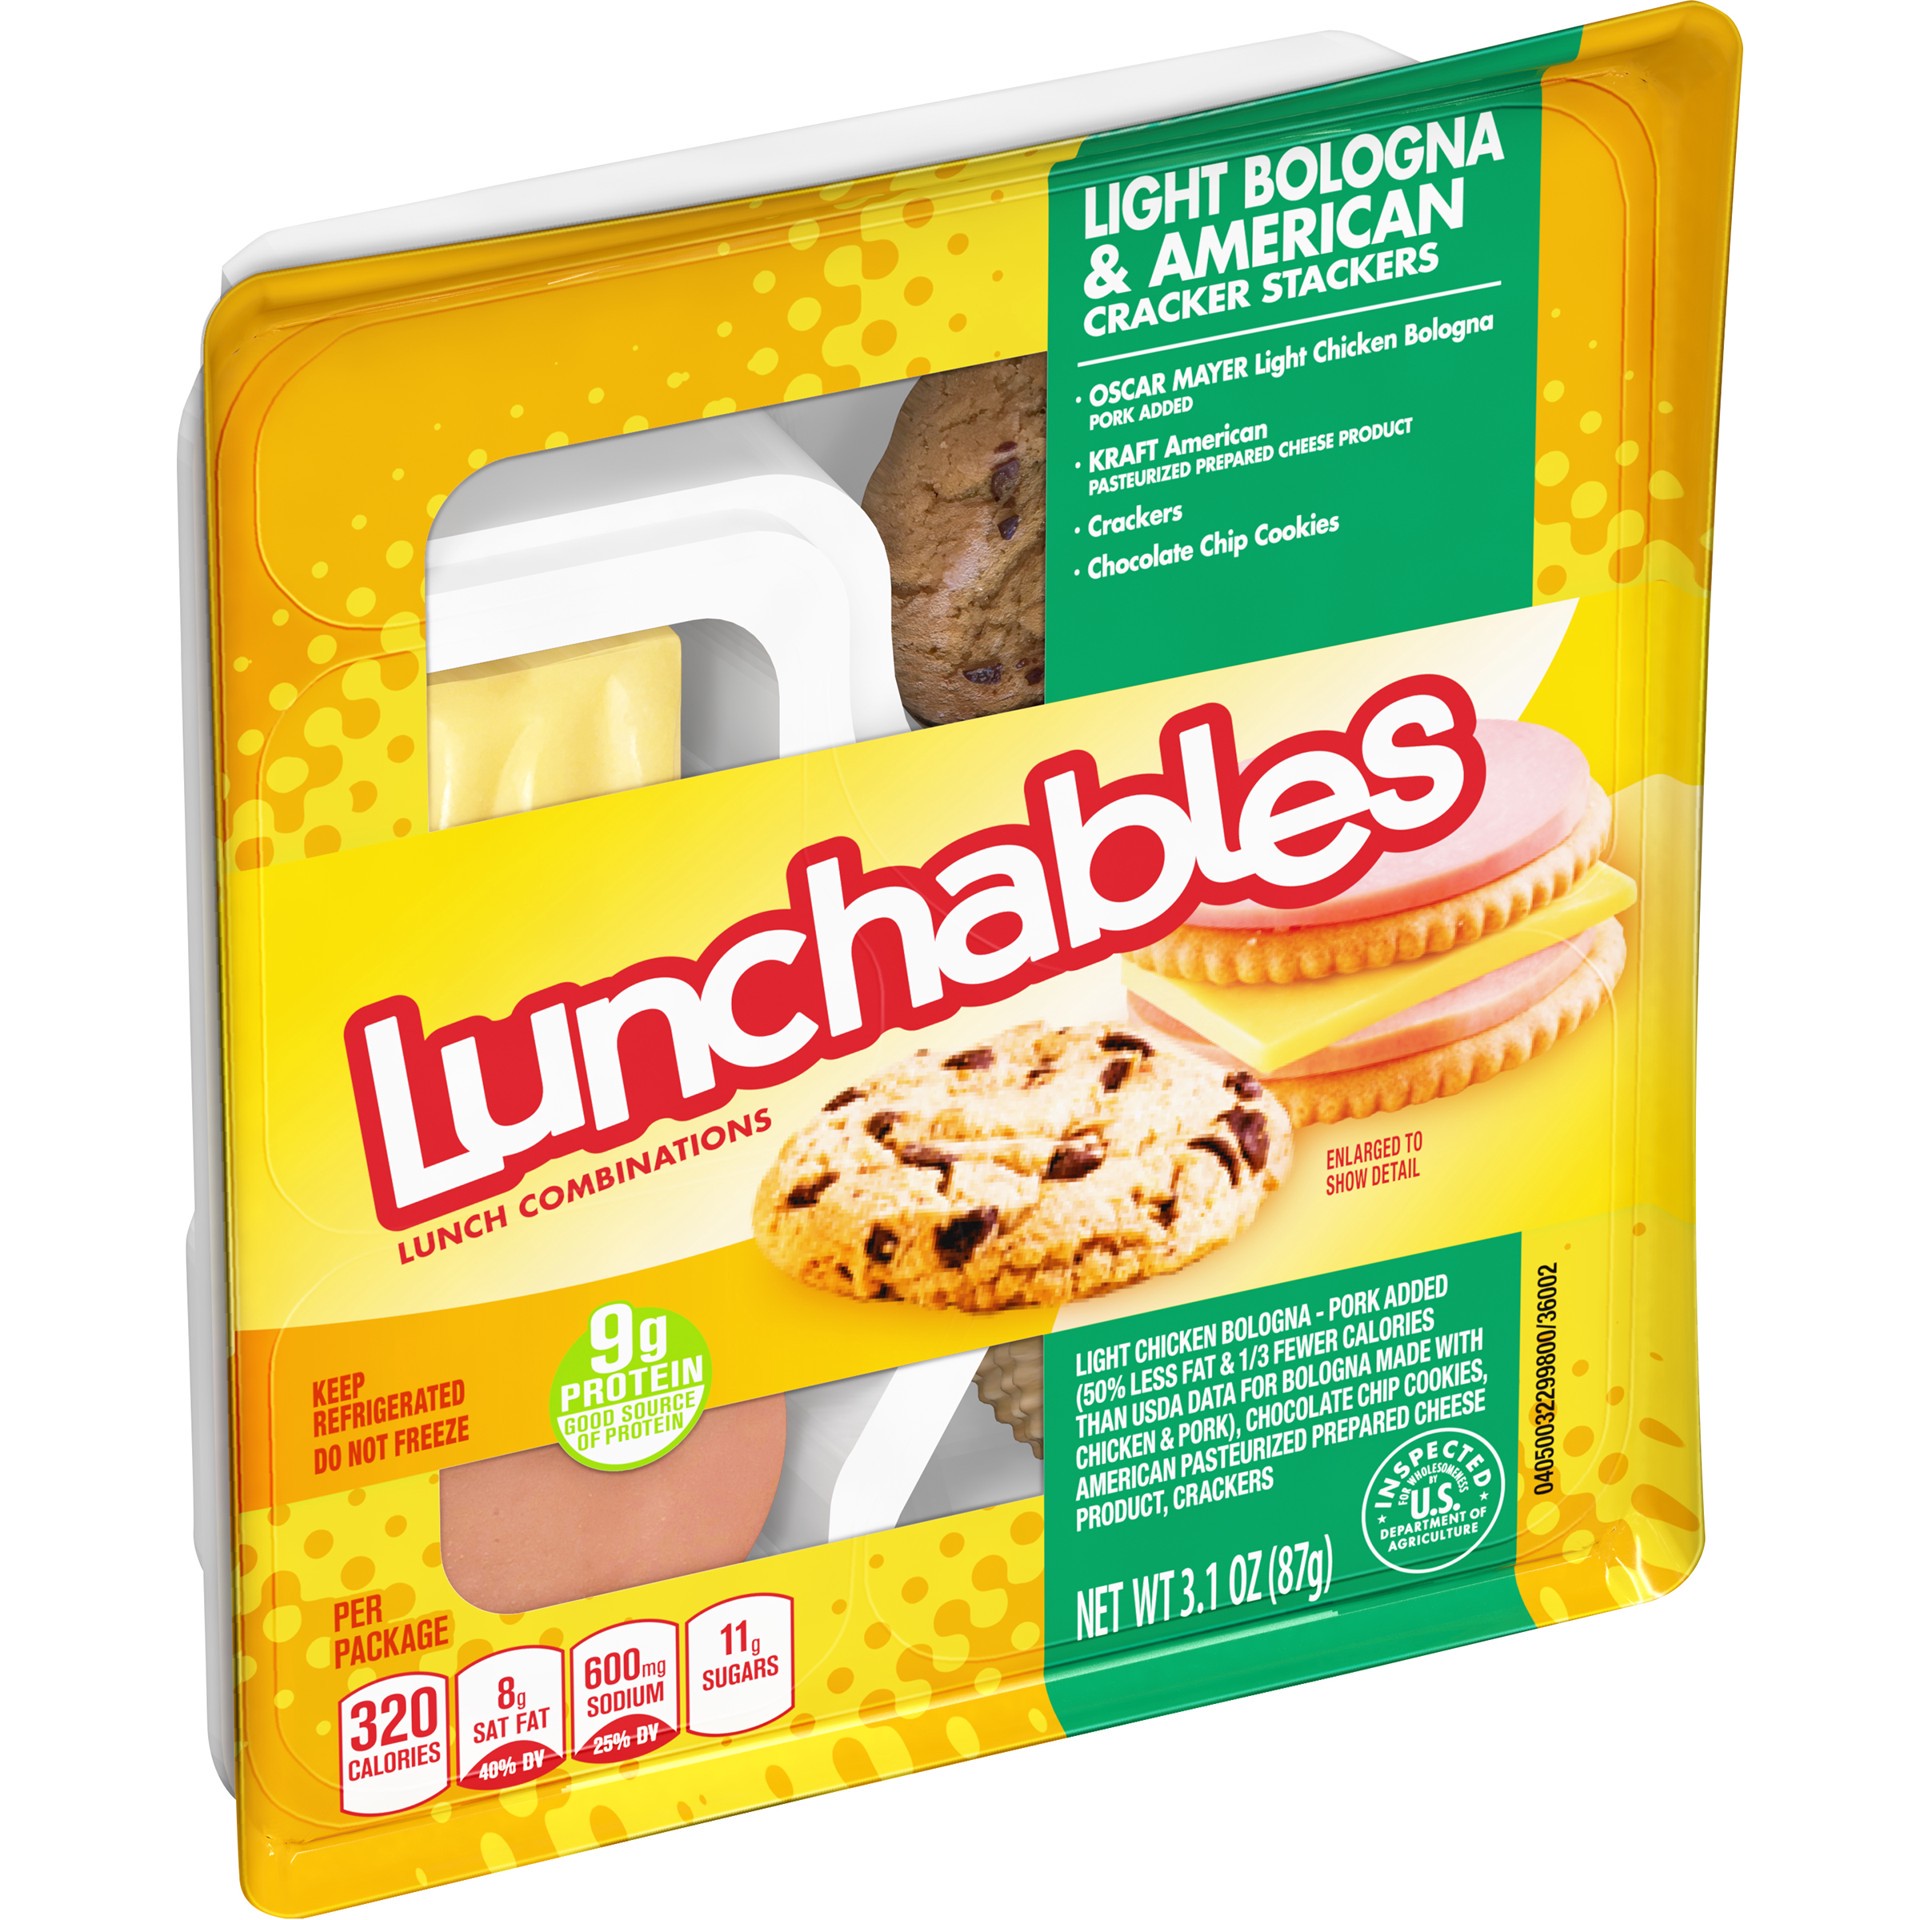 slide 12 of 13, Lunchables Light Bologna & American Cracker Stackers with Chocolate Chip Cookies Tray, 3.1 oz